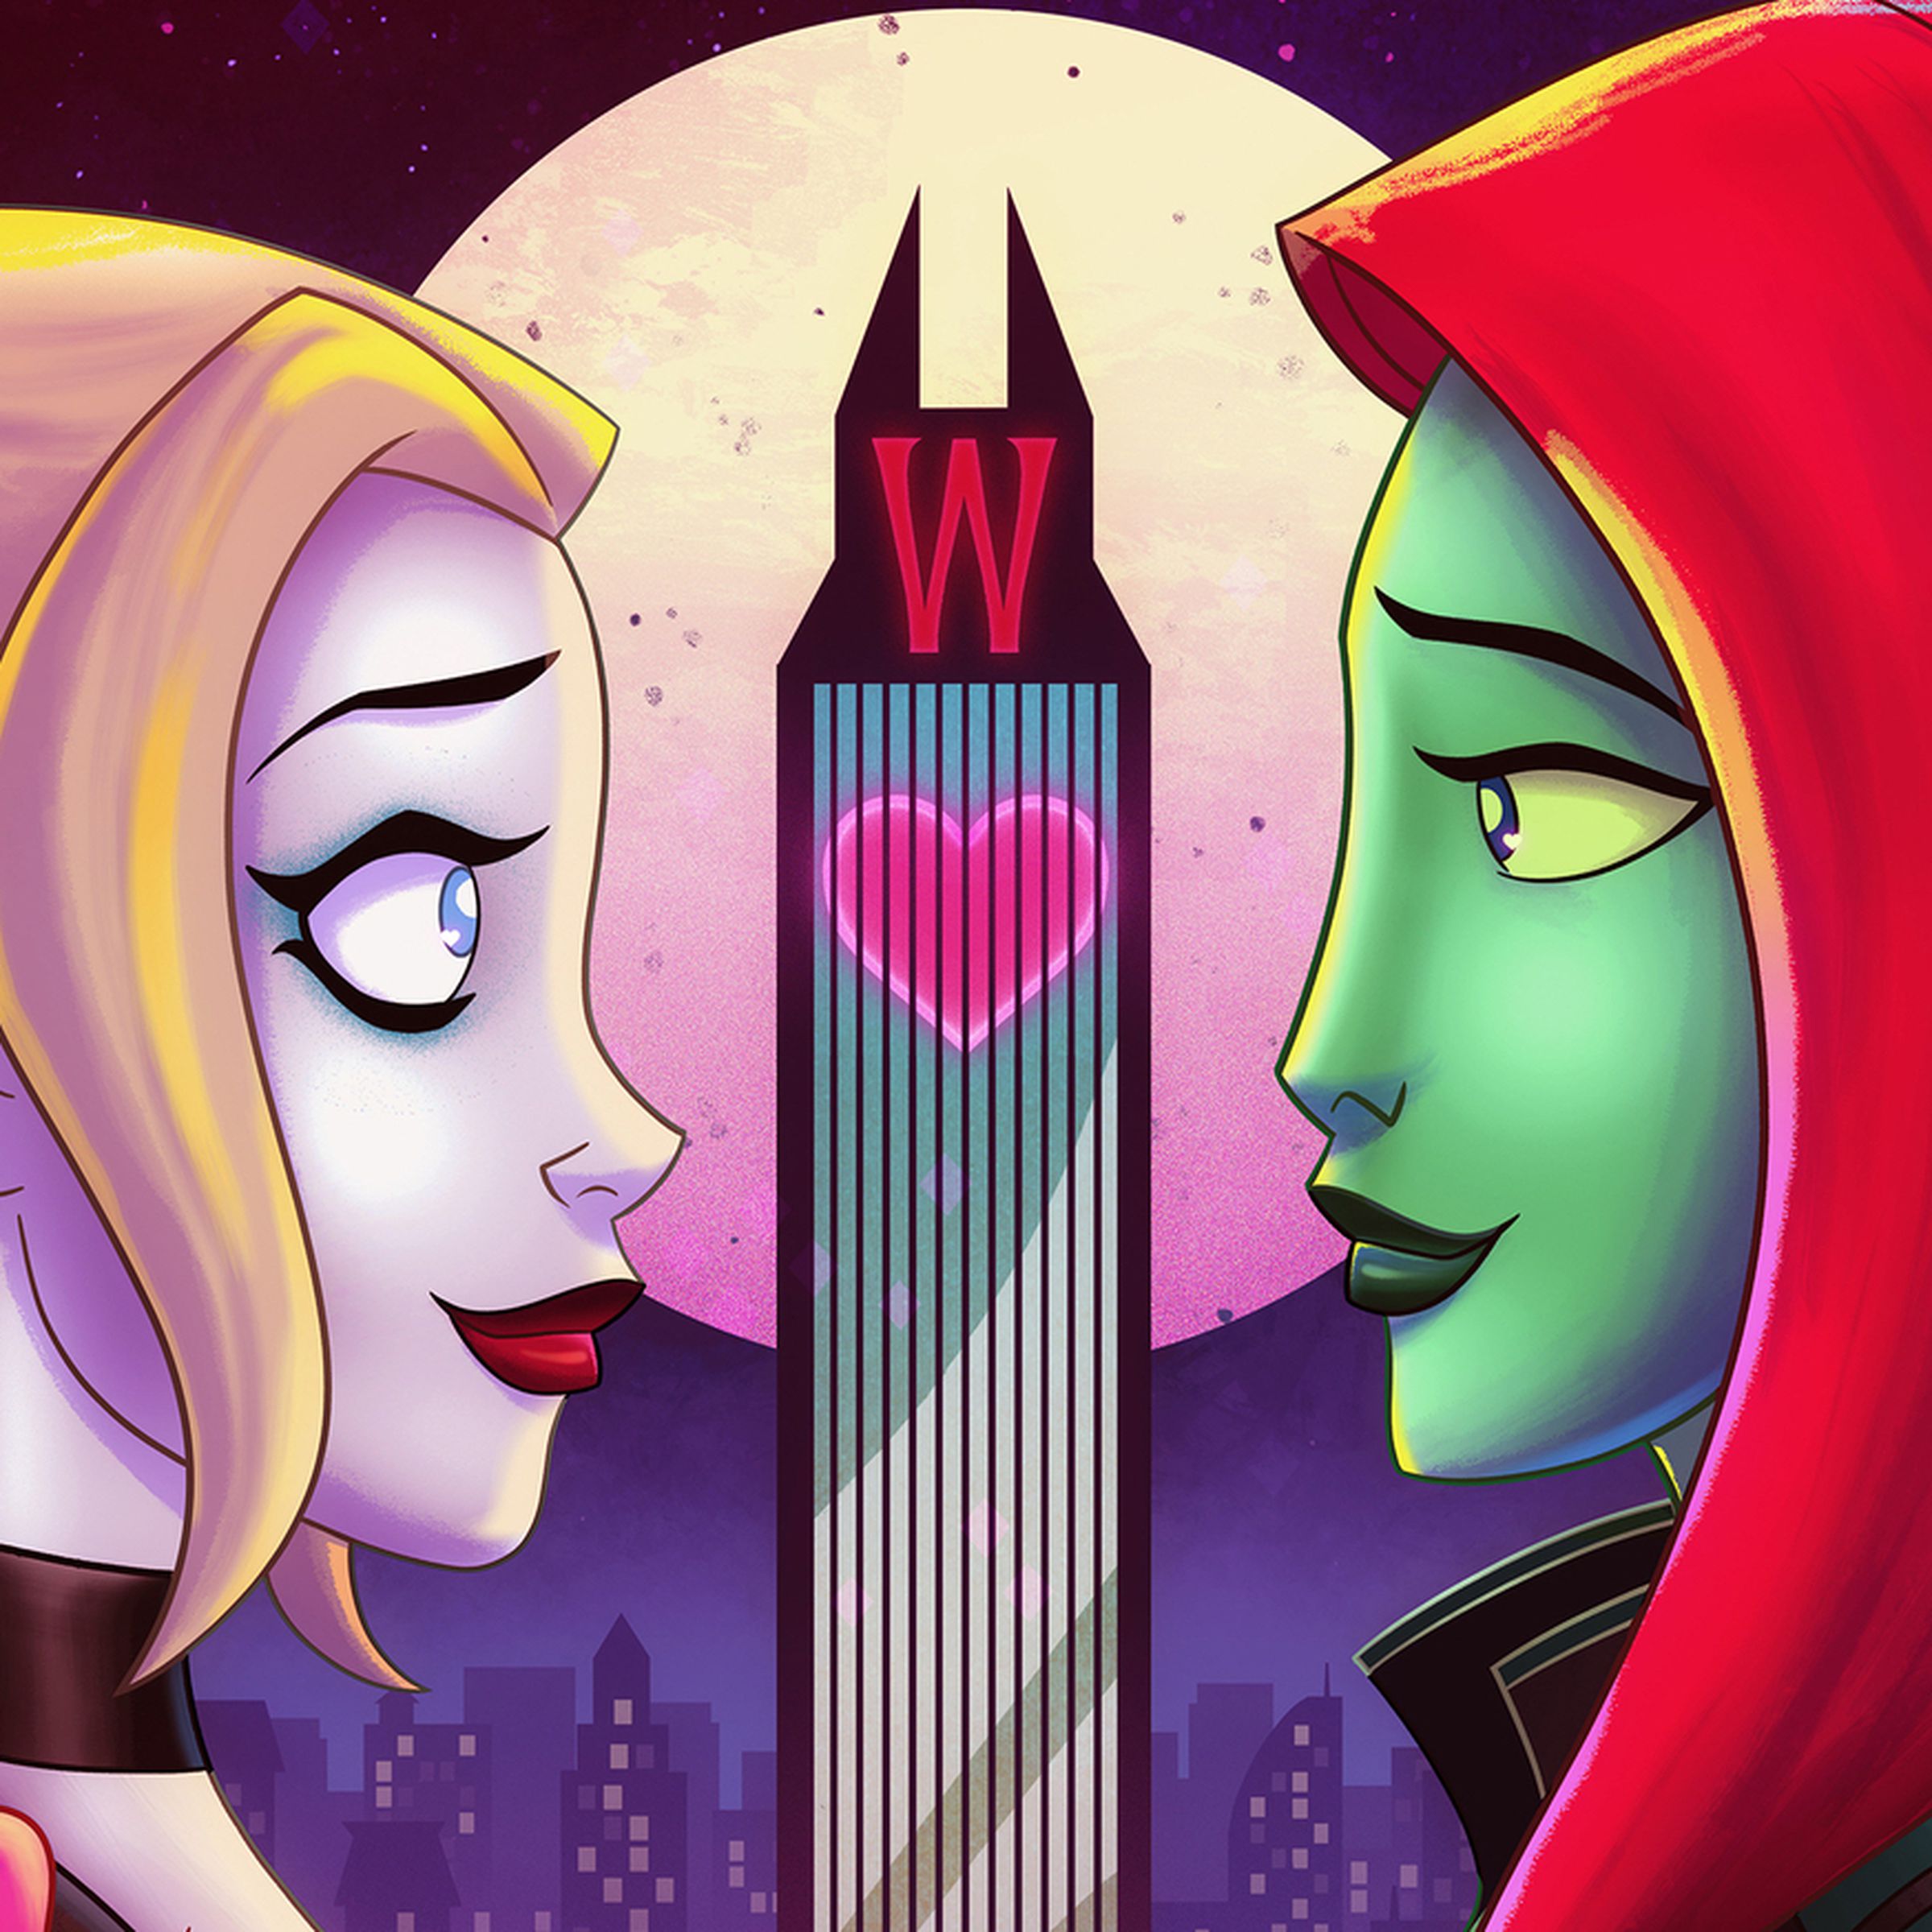 A blonde woman with a pink-tipped pigtail, choker, and chalk-white skin standing in profile across from another woman with green skin and red hair. Behind the two women is a skyscraper whose tip resembles Batman’s ears.